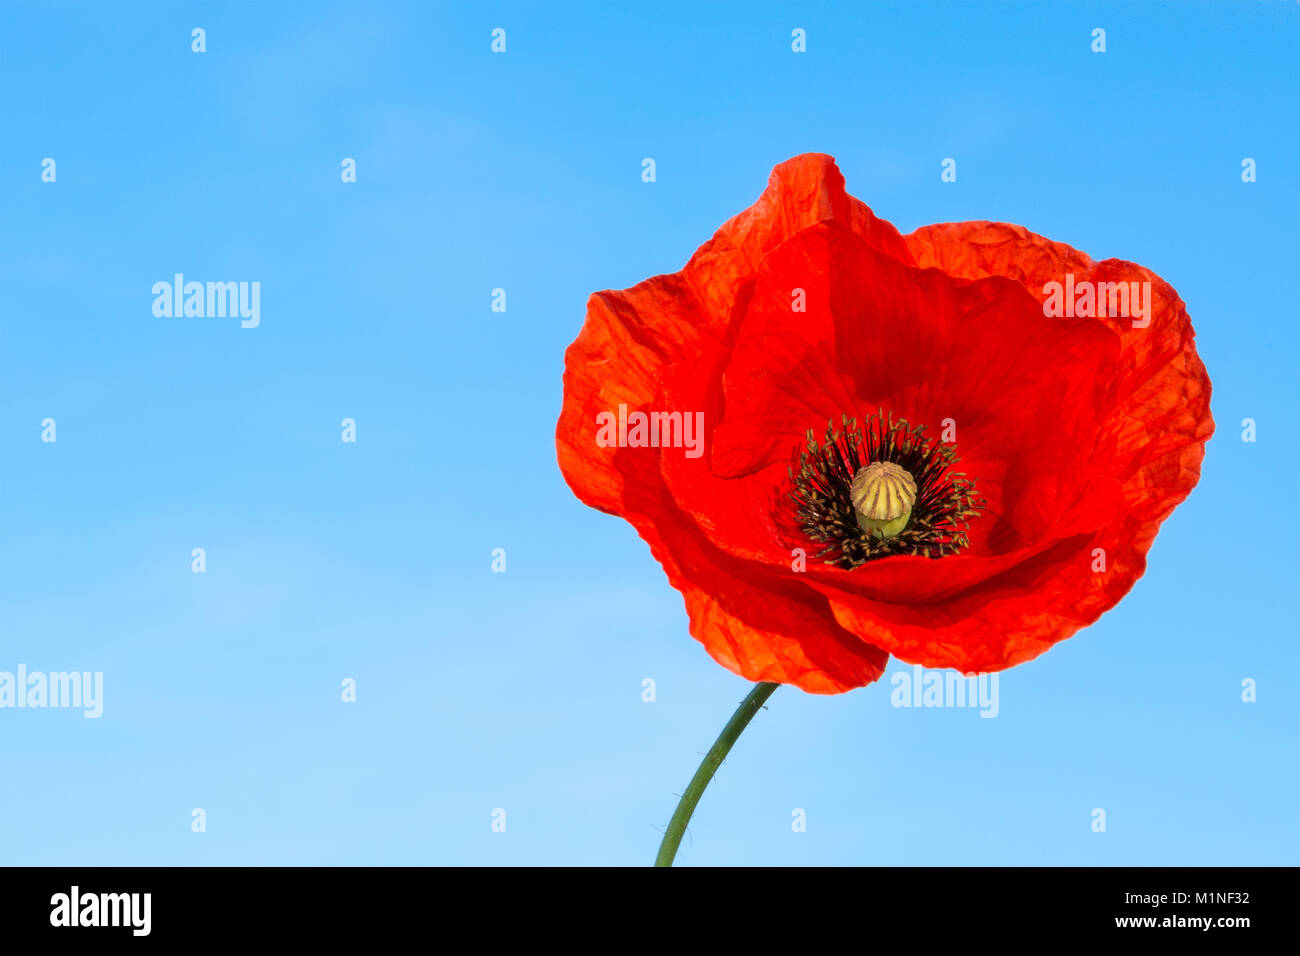 Beautiful red flower of poppy on a blue background. Papaver rhoeas. The silhouette of solitary wild corn rose in bloom against blue summer sky. Stock Photo